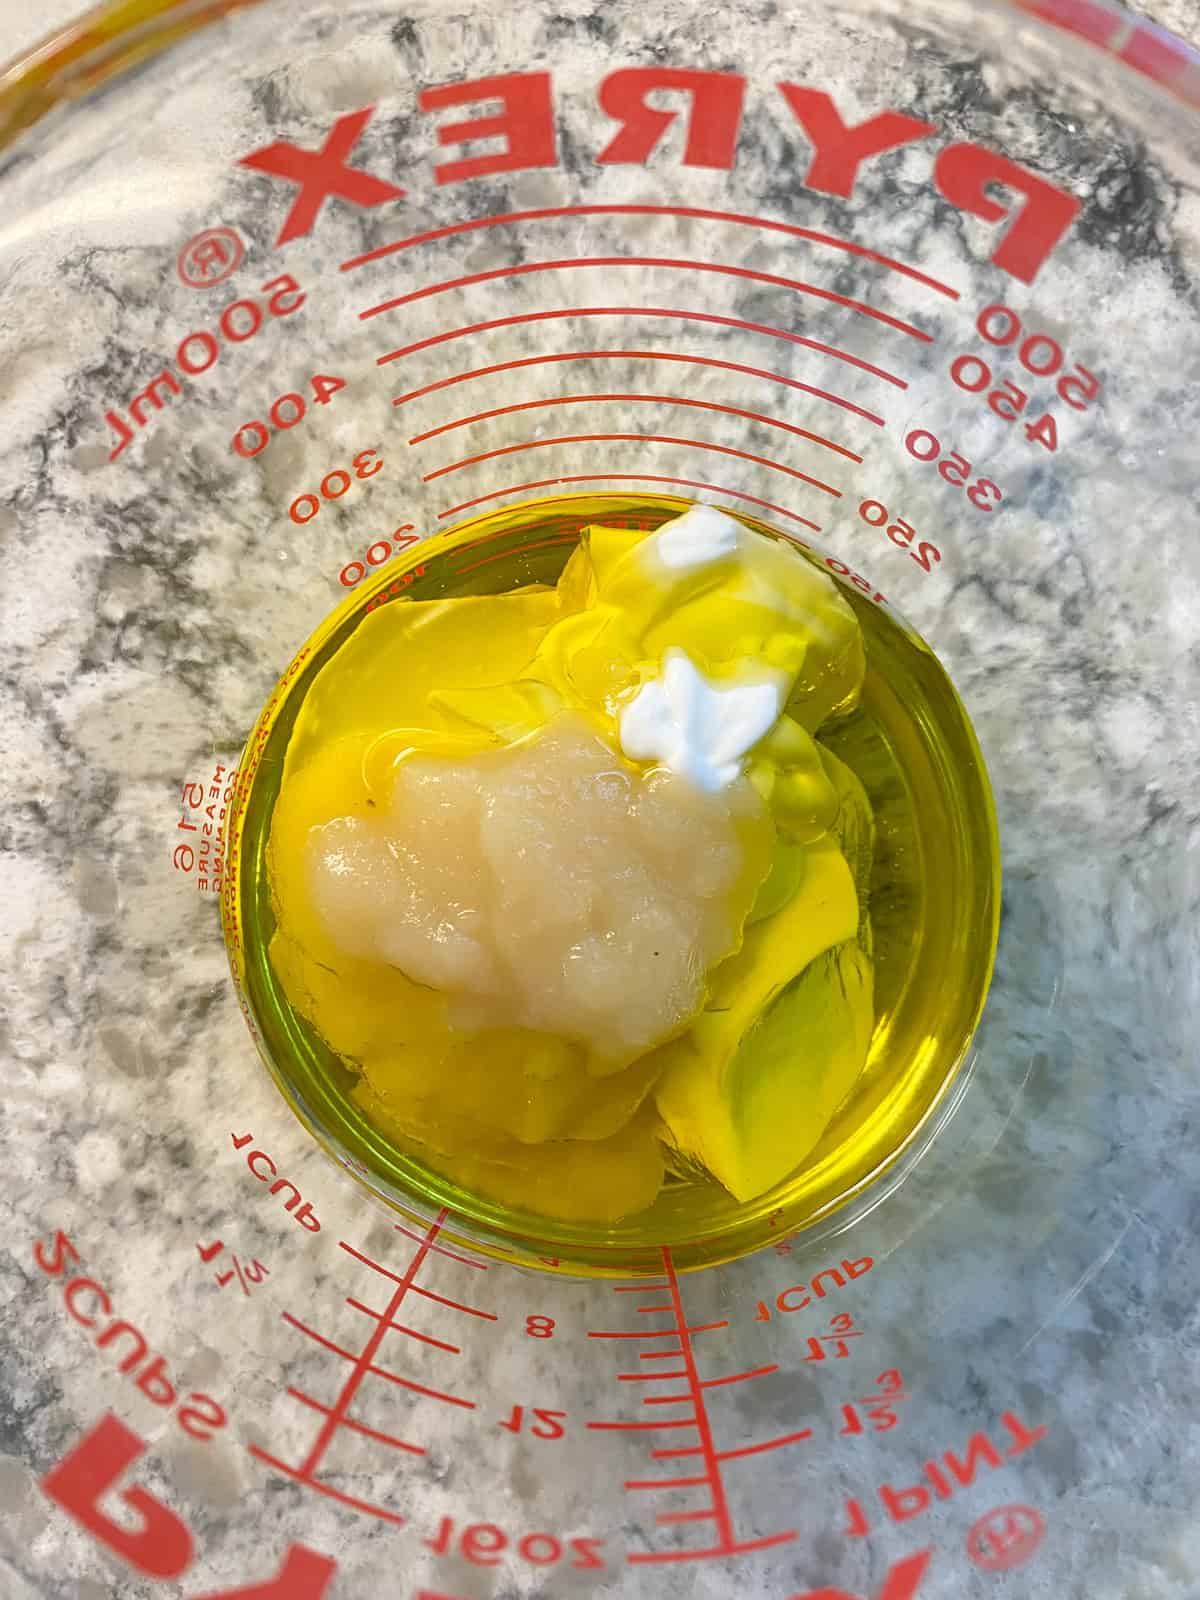 Wet ingredients in a glass liquid measuring cup.